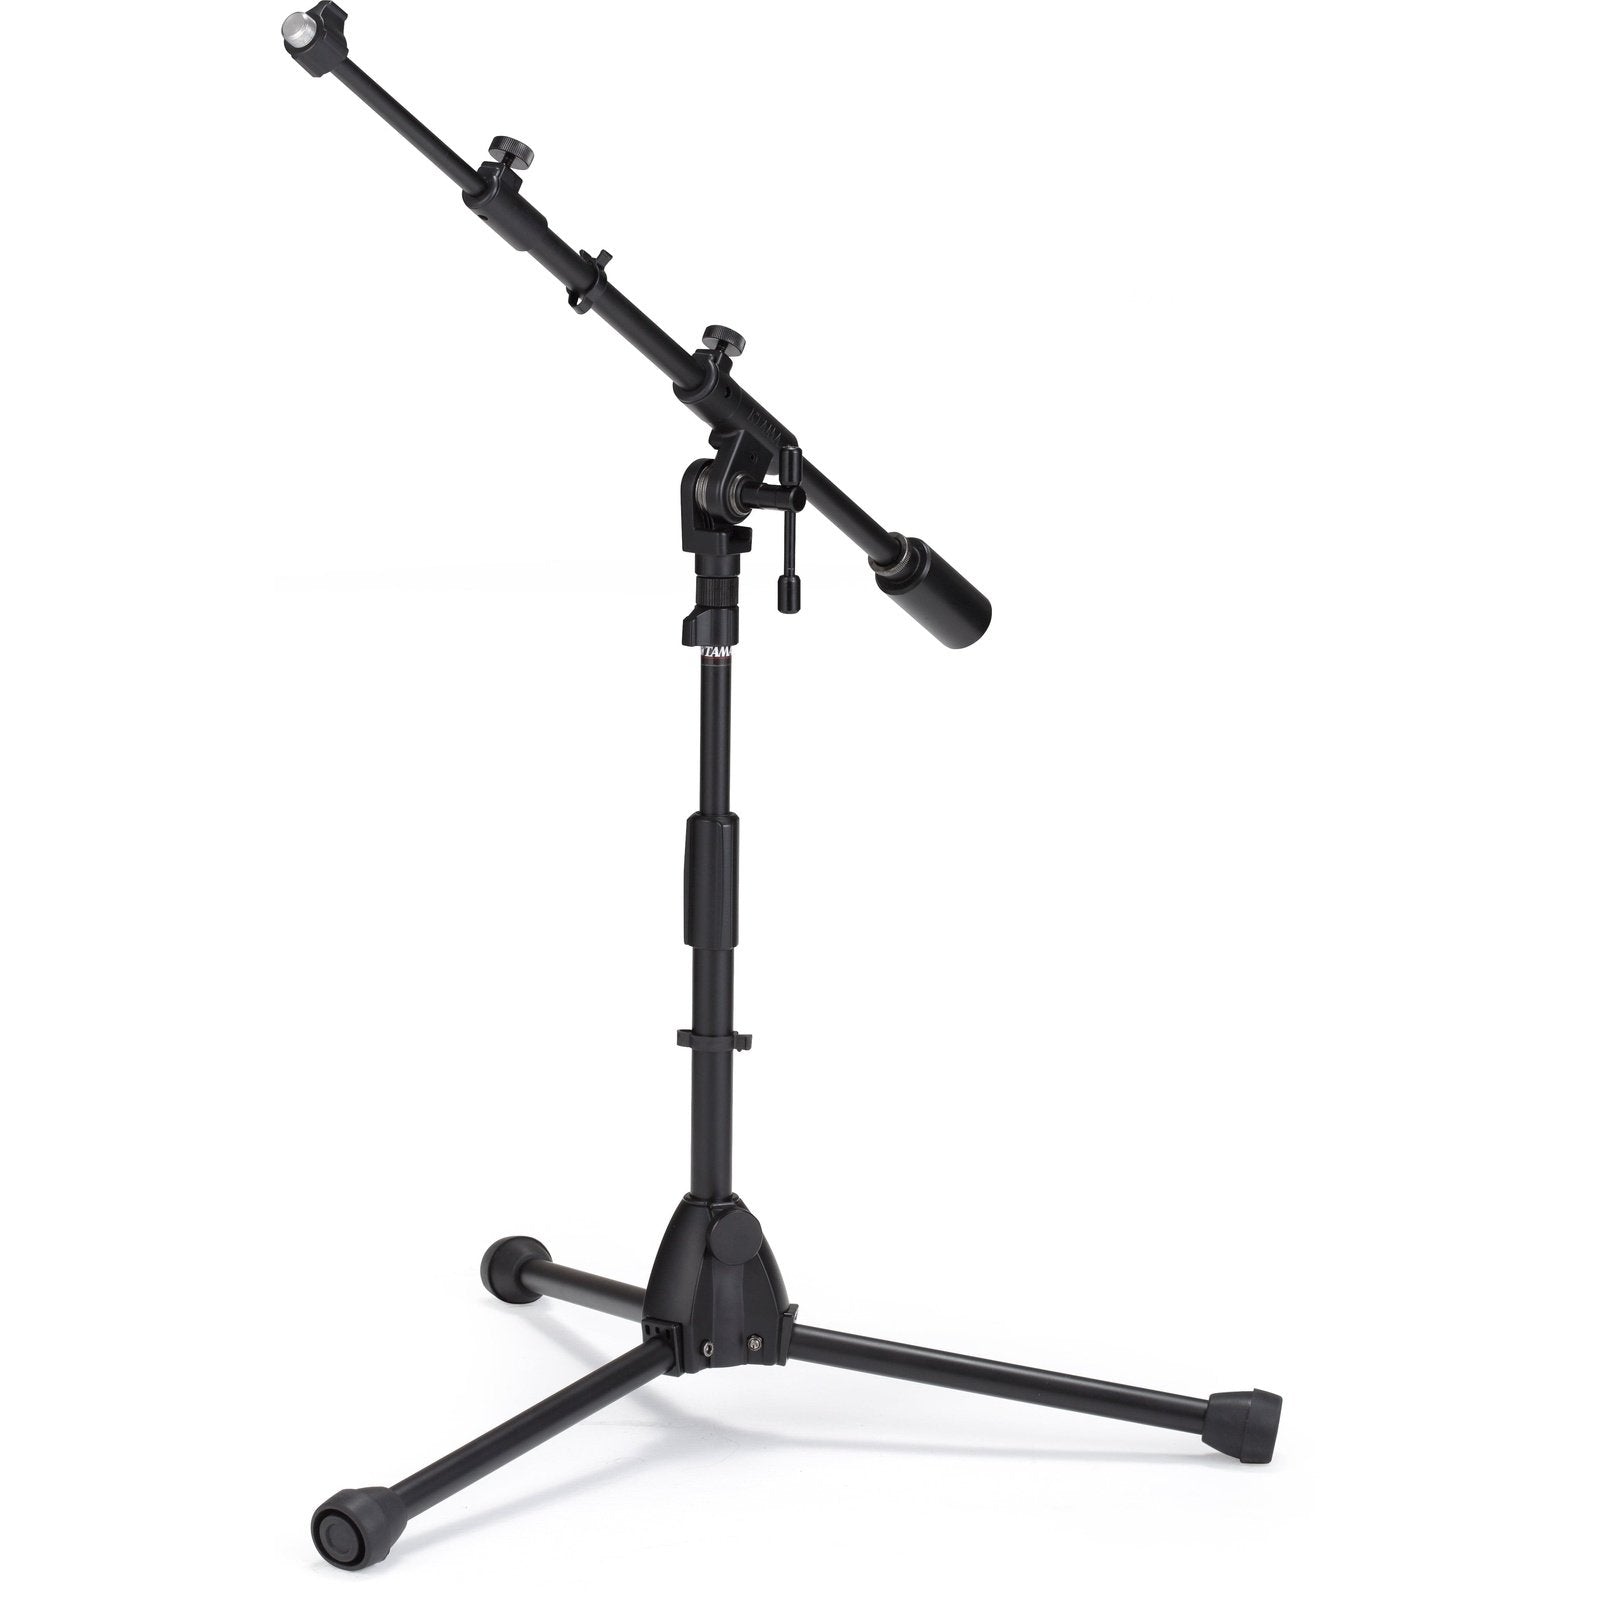 Gibraltar GOMBS Overhead Microphone Boom Stand